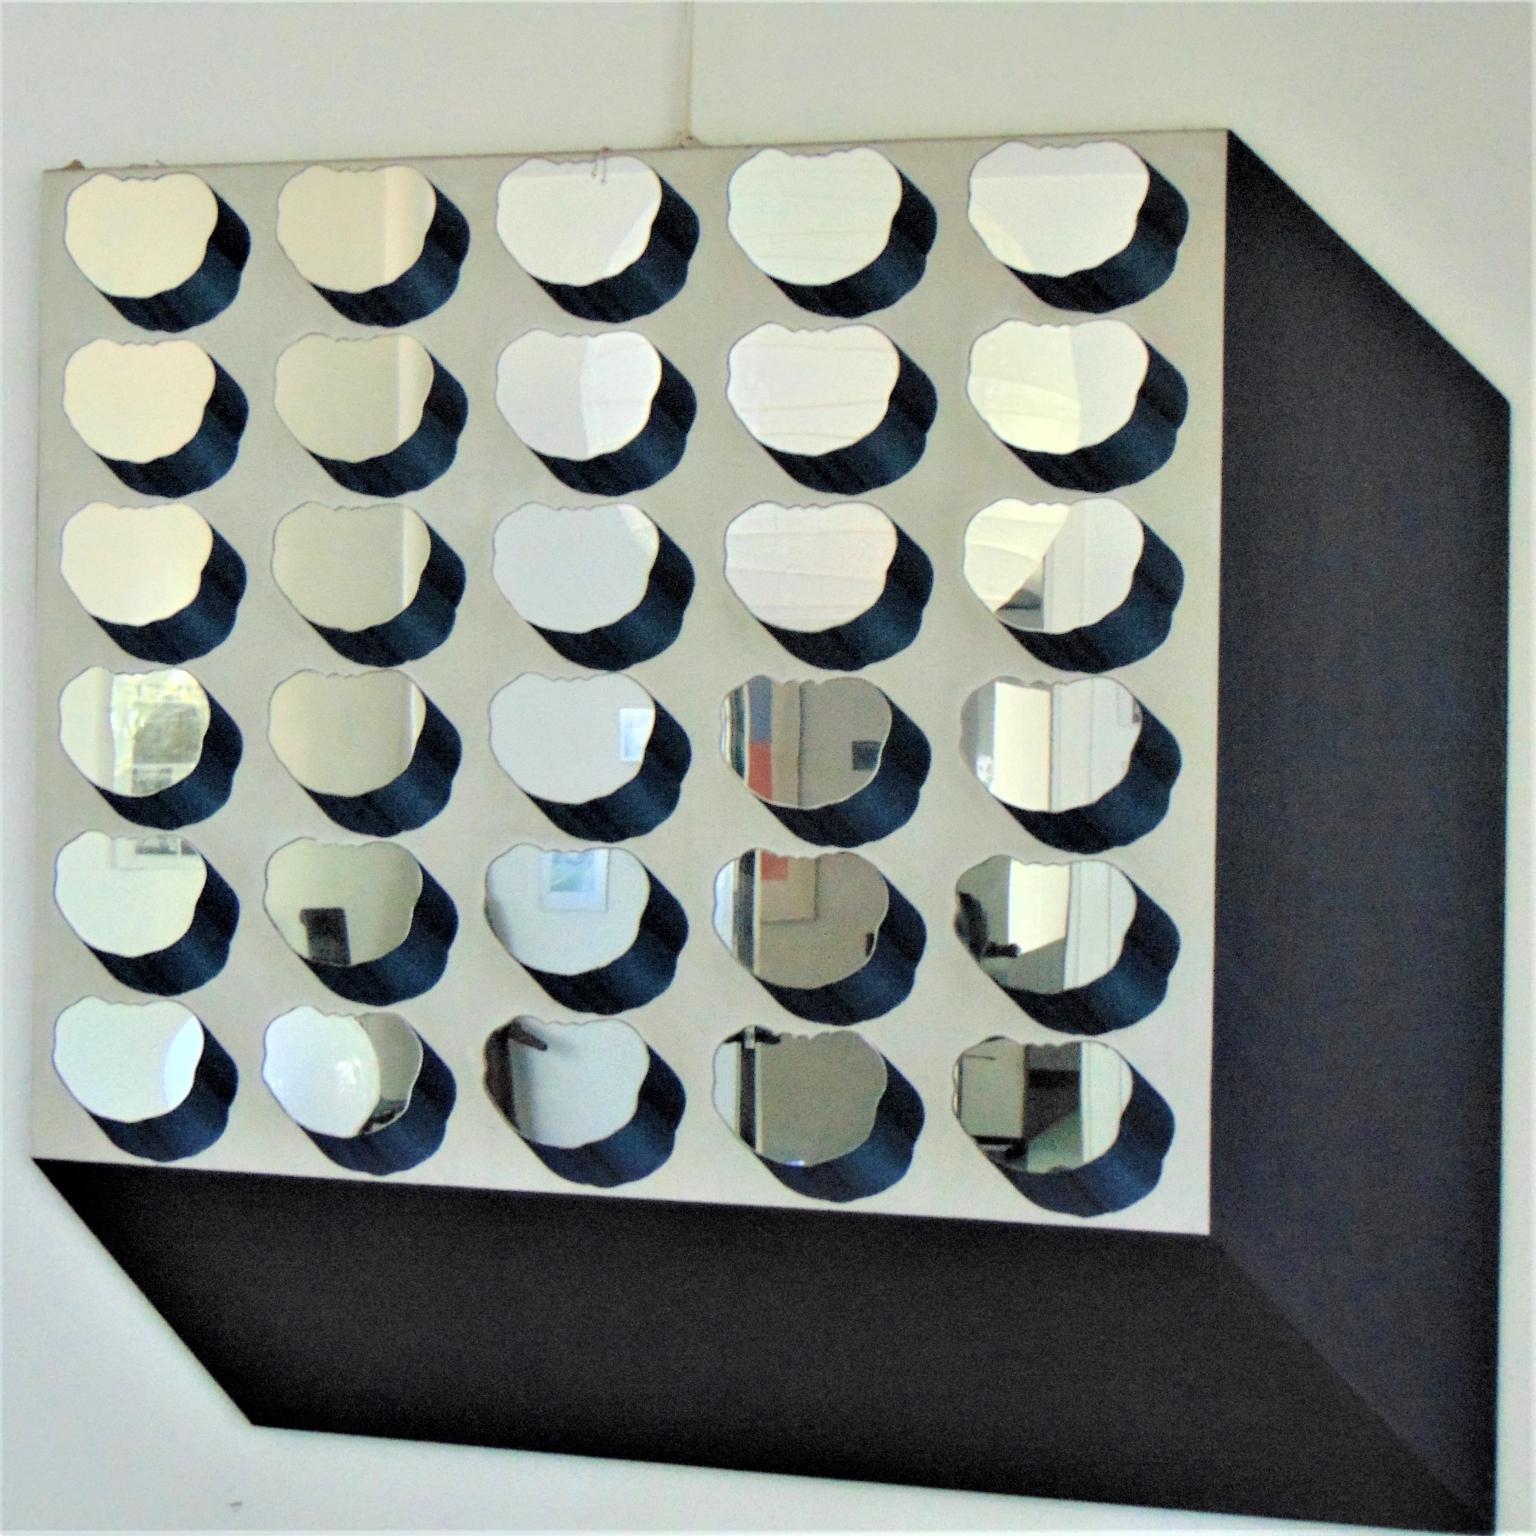 1968 Mirrored Pop Art Wall Sculpture, Concetto Pozzati, Acrylic on Canvas, Italy For Sale 5